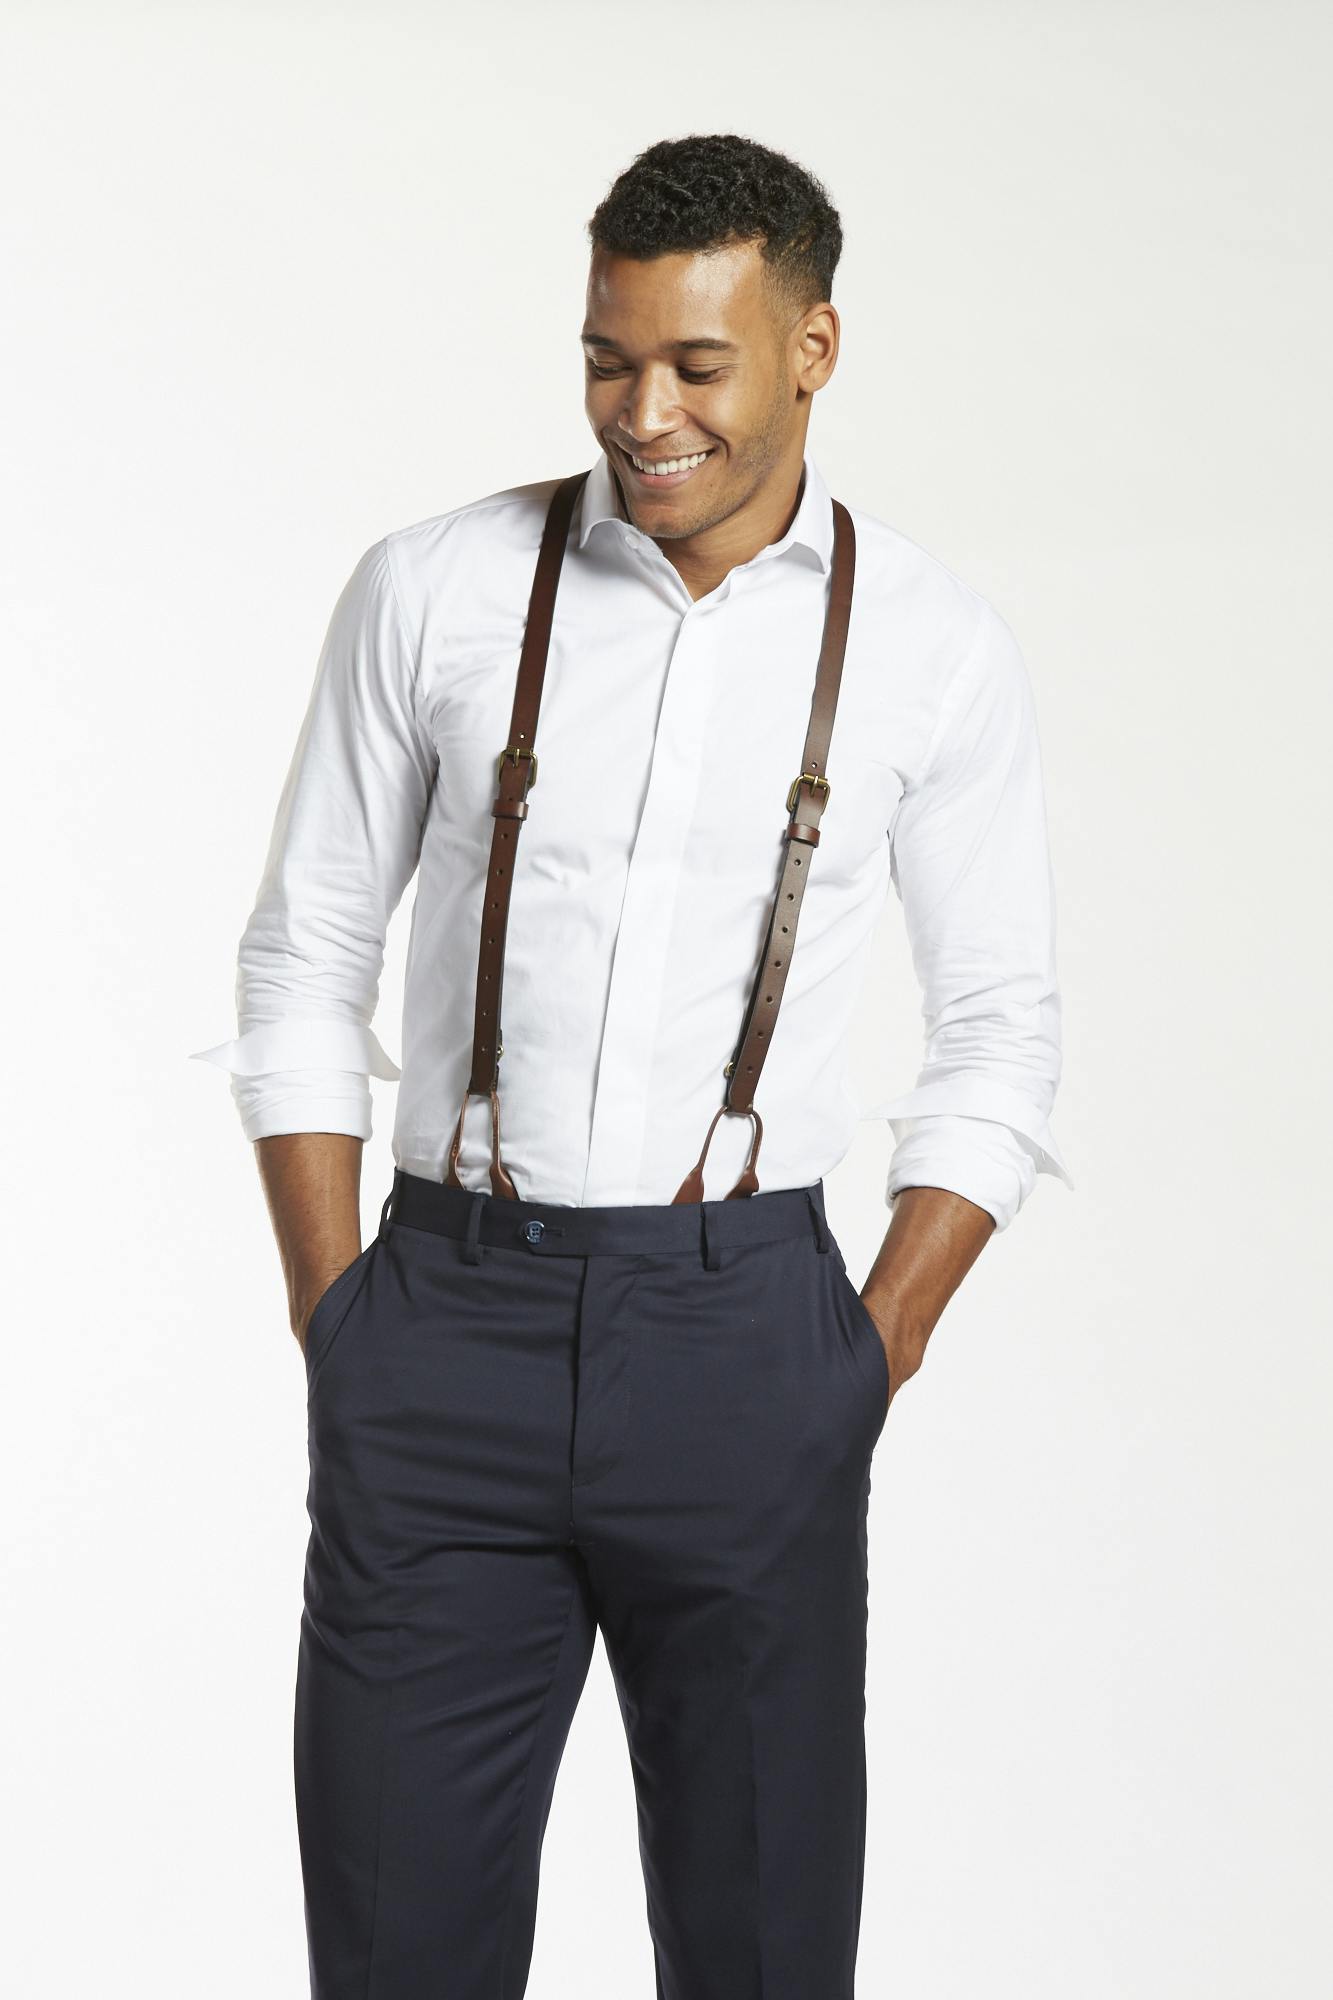 Suspenders 101 For Men  What To Know & How To Wear Them 